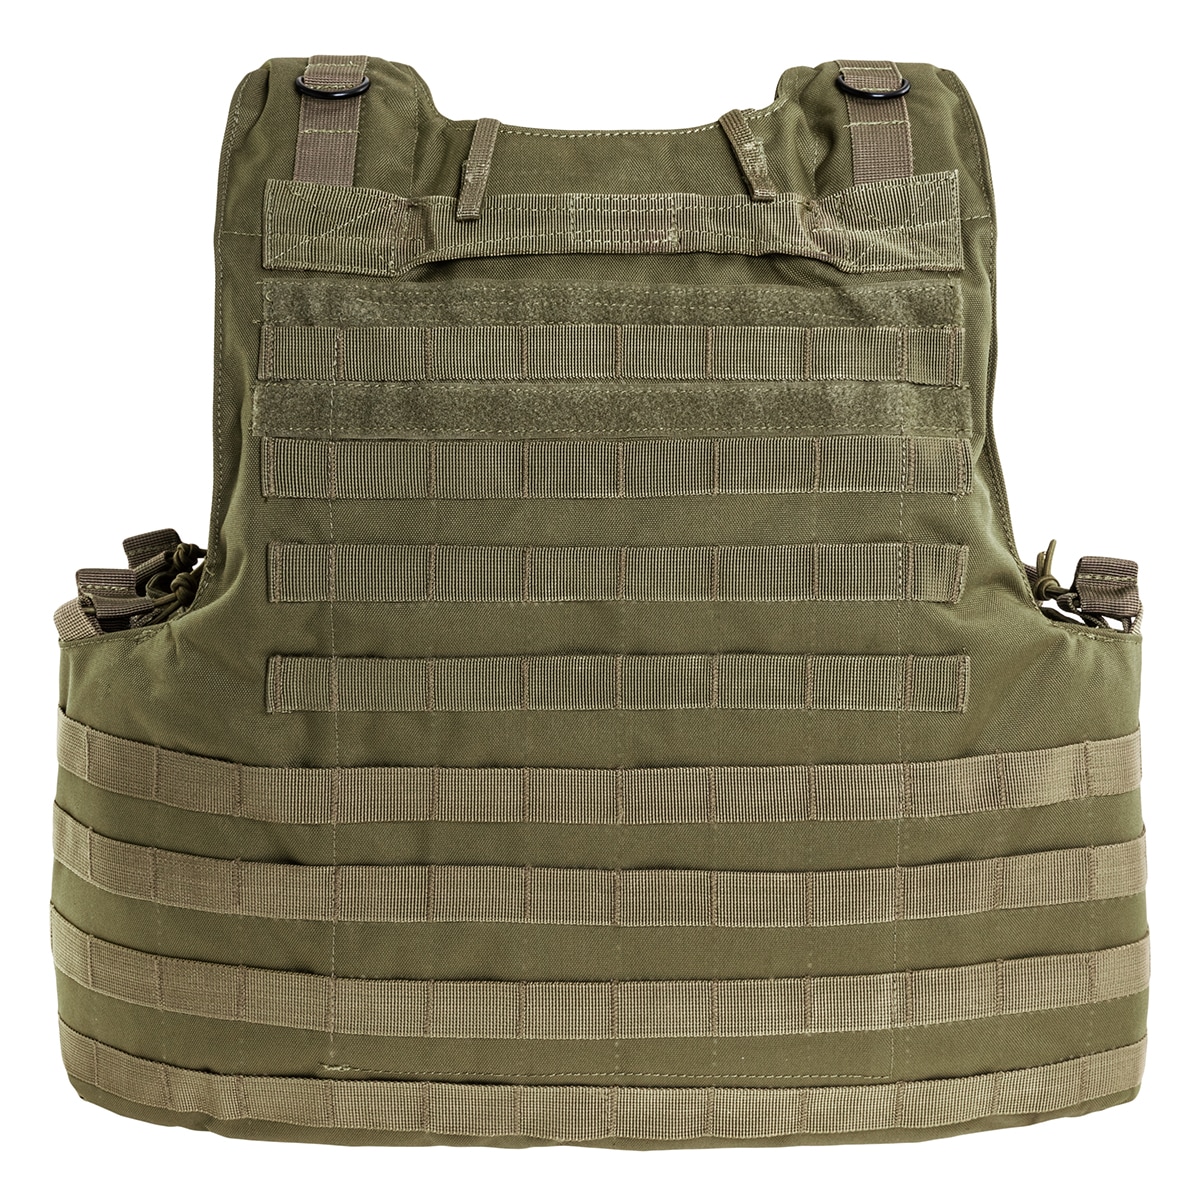 Kamizelka taktyczna Voodoo Tactical  Armor Plate Carrier Maximum Protection - Olive